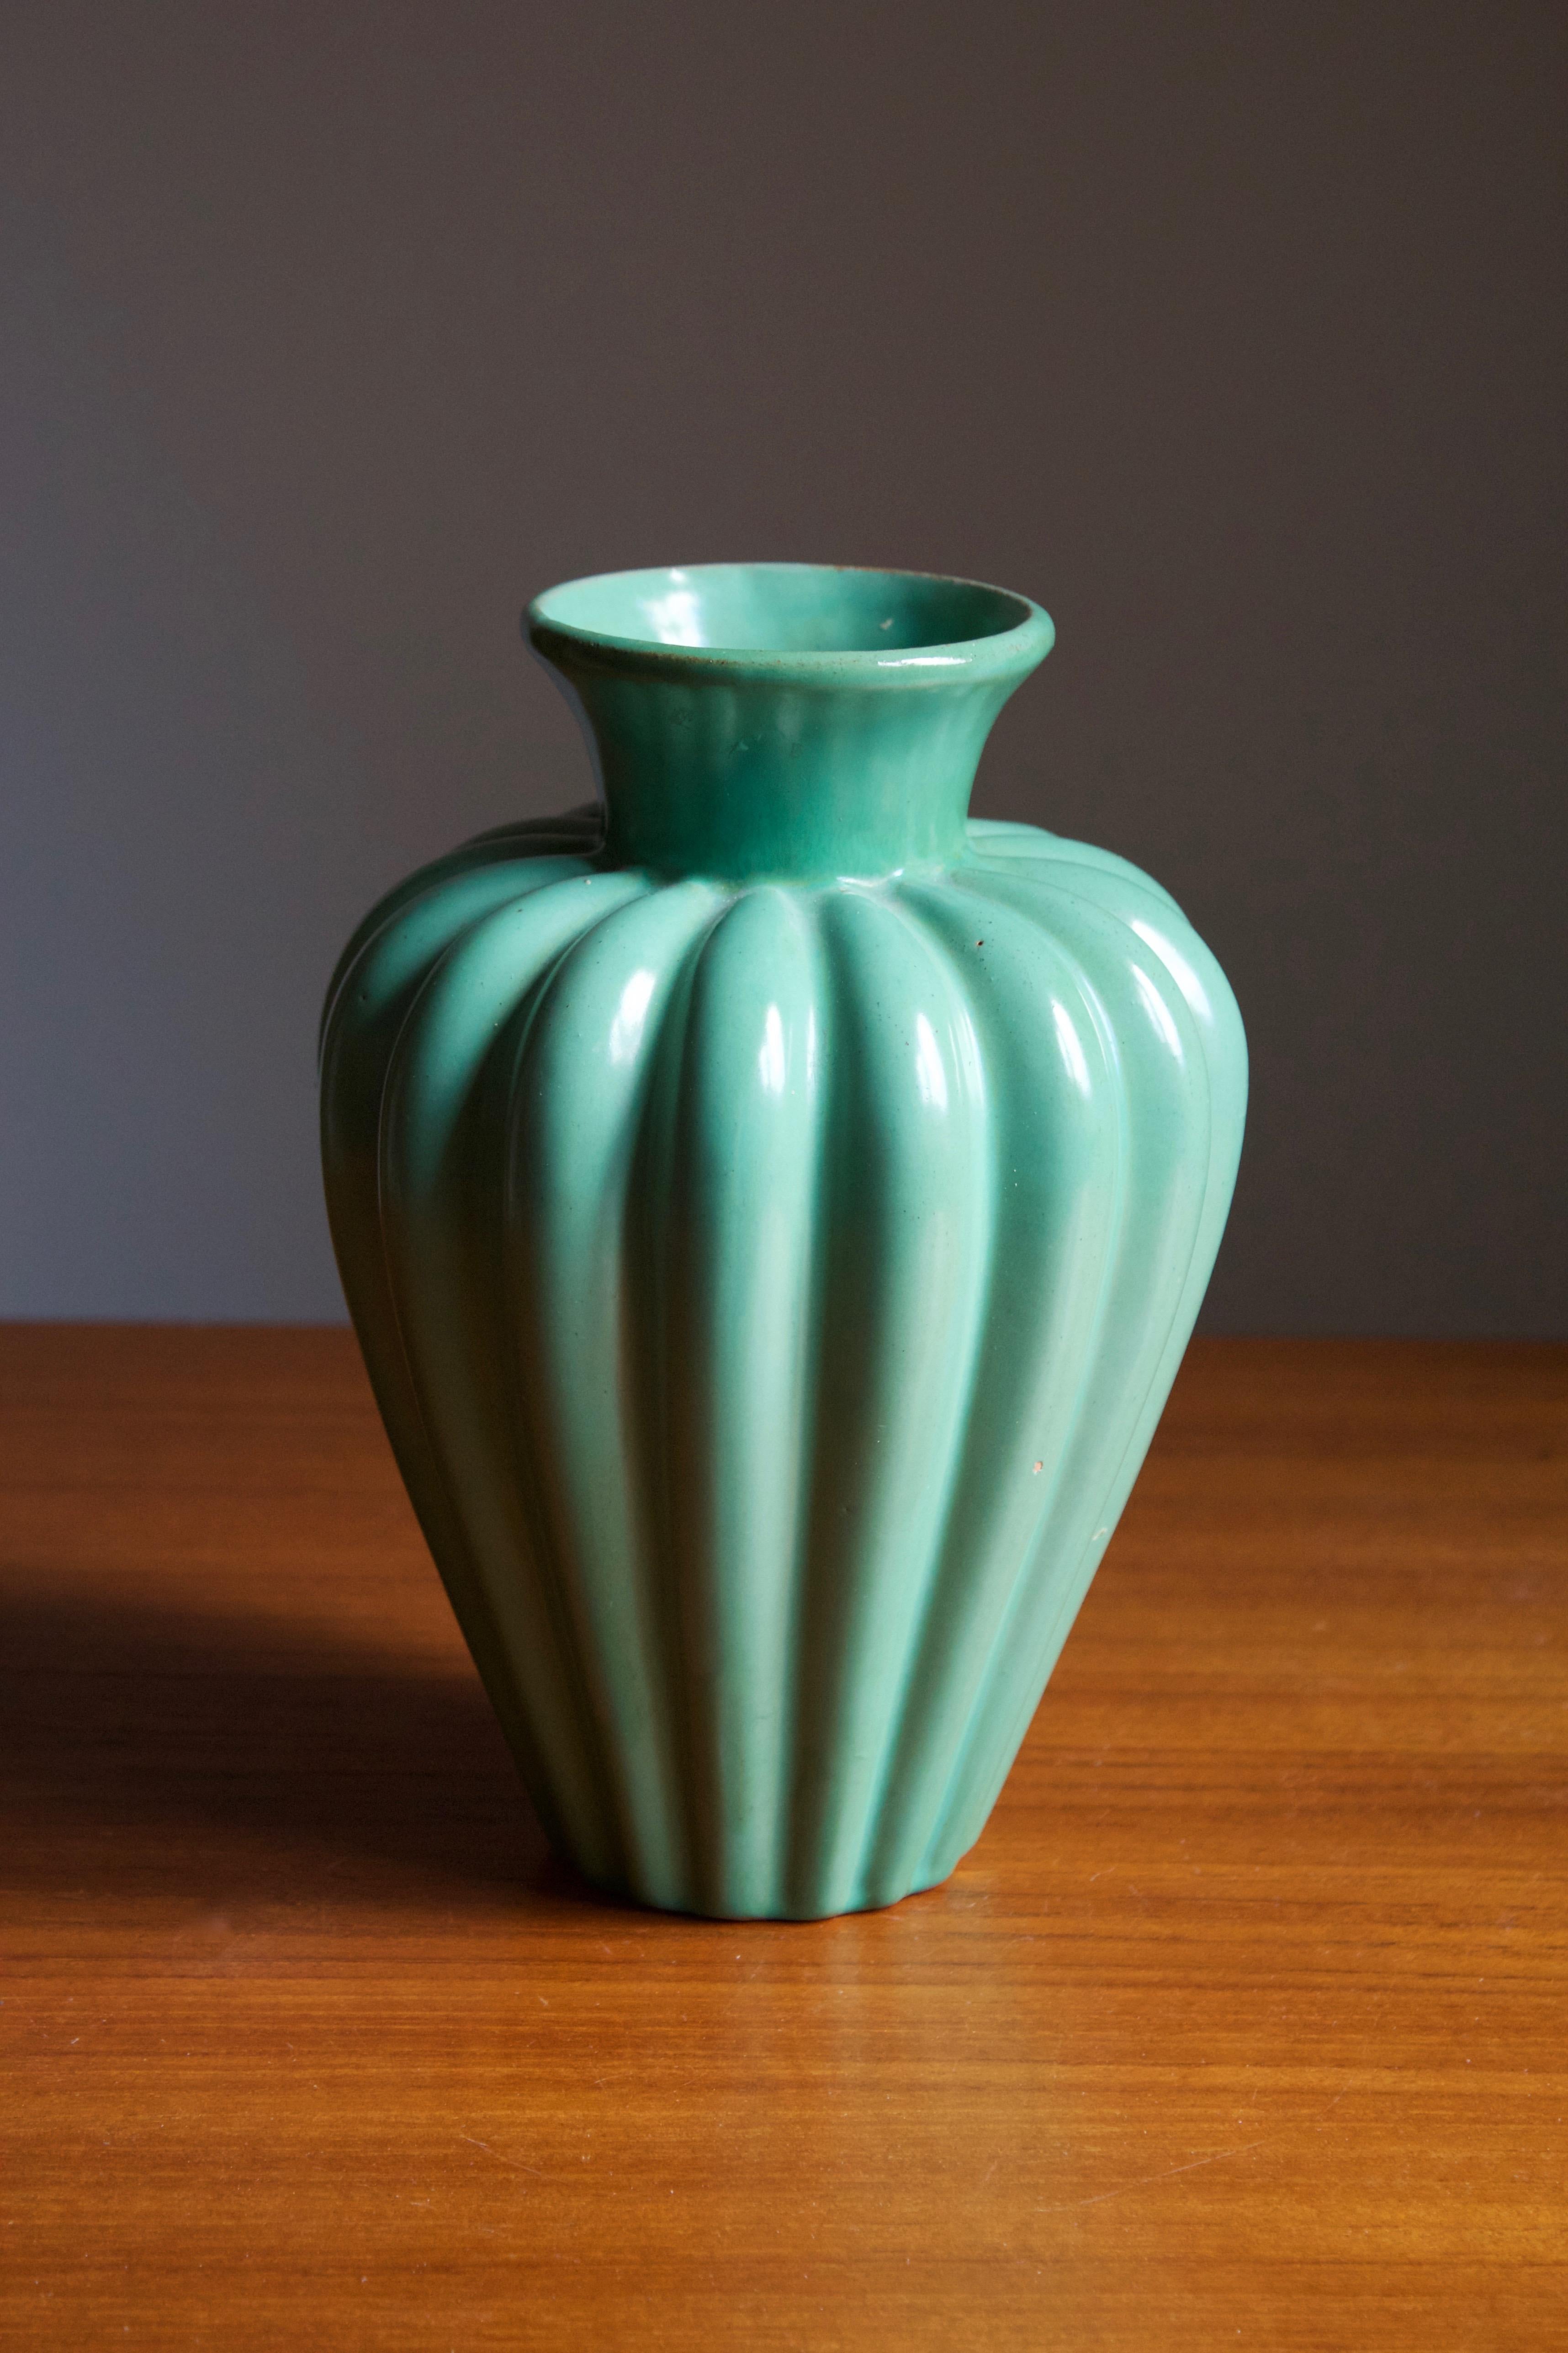 An early modernist vase. Produced by Upsala-Ekeby, Sweden, 1940s. Earthenware. 

Other designers of the period include Ettore Sottsass, Carl Harry Stålhane, Lisa Larsson, Axel Salto, and Arne Bang.